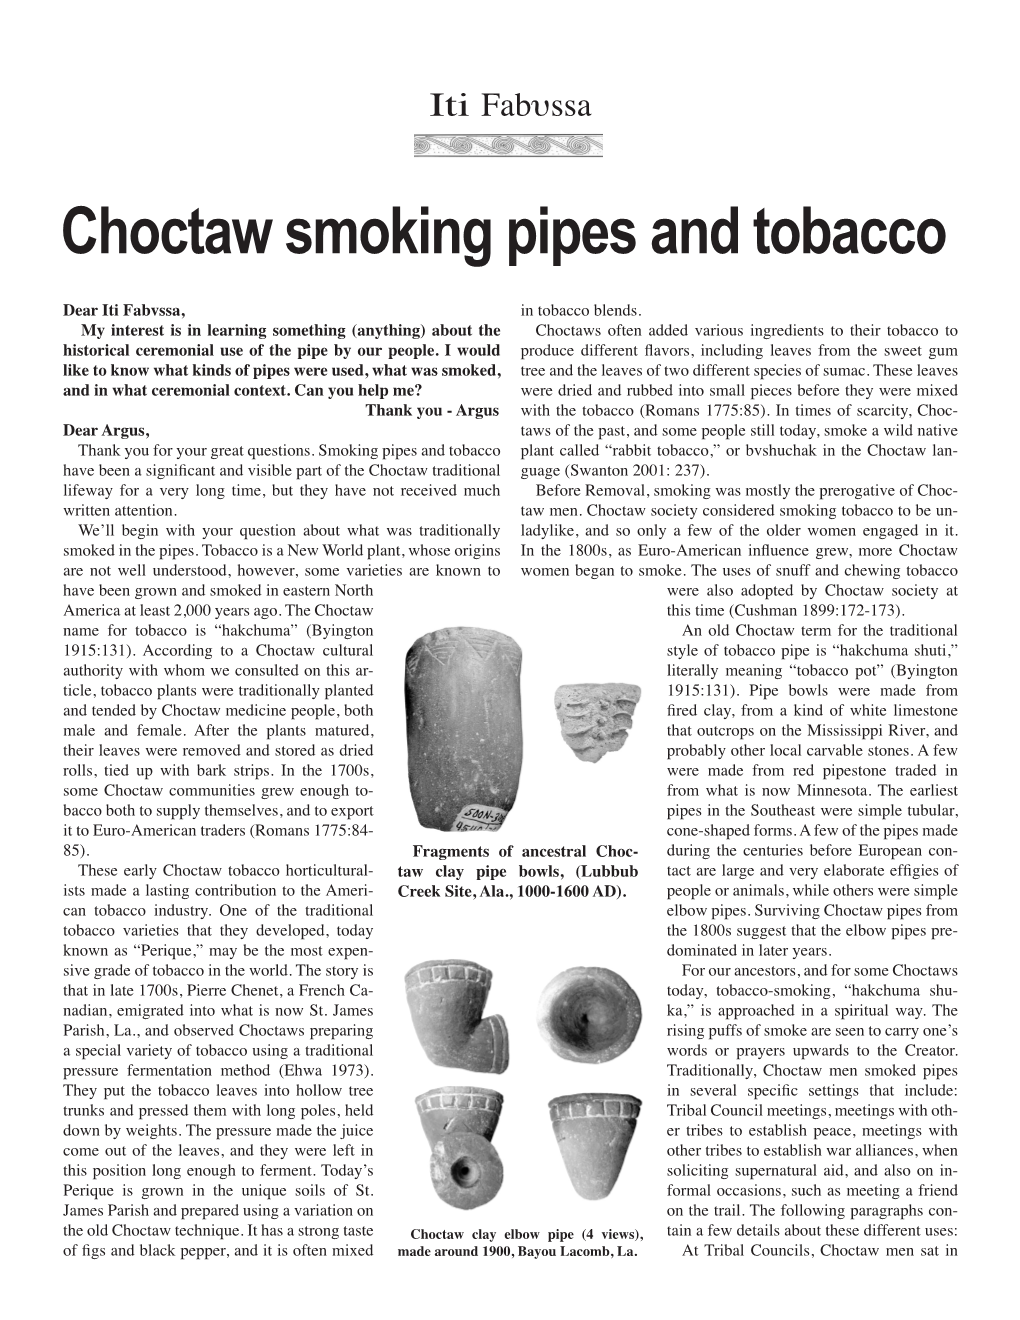 Choctaw Smoking Pipes and Tobacco